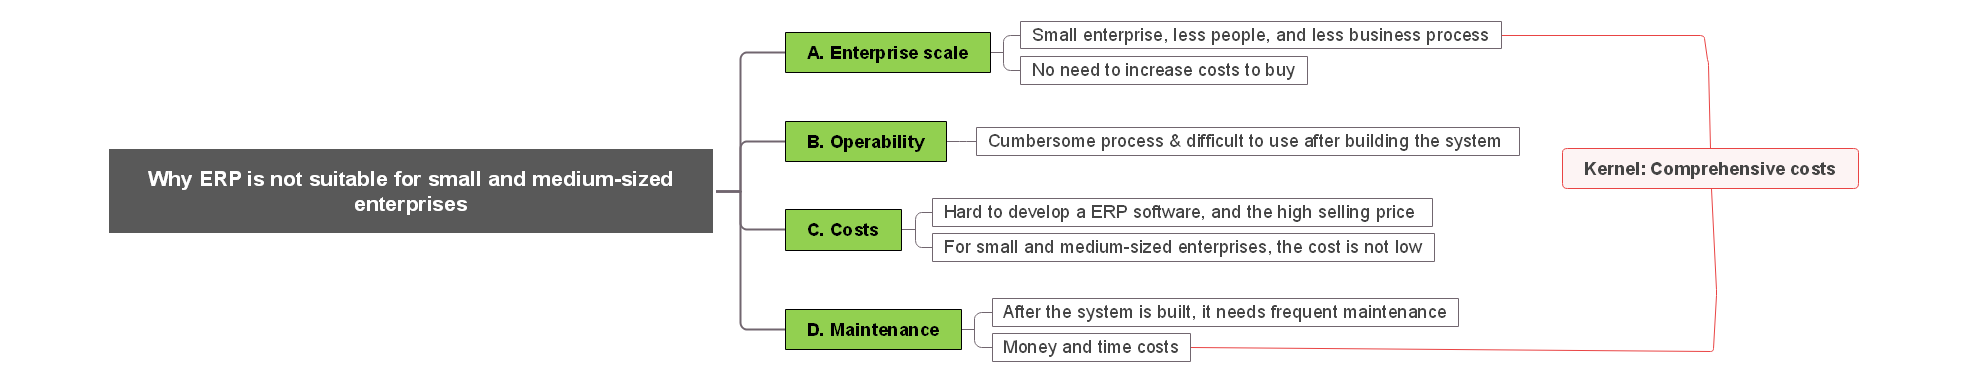 ERP is not suitable for SMEs